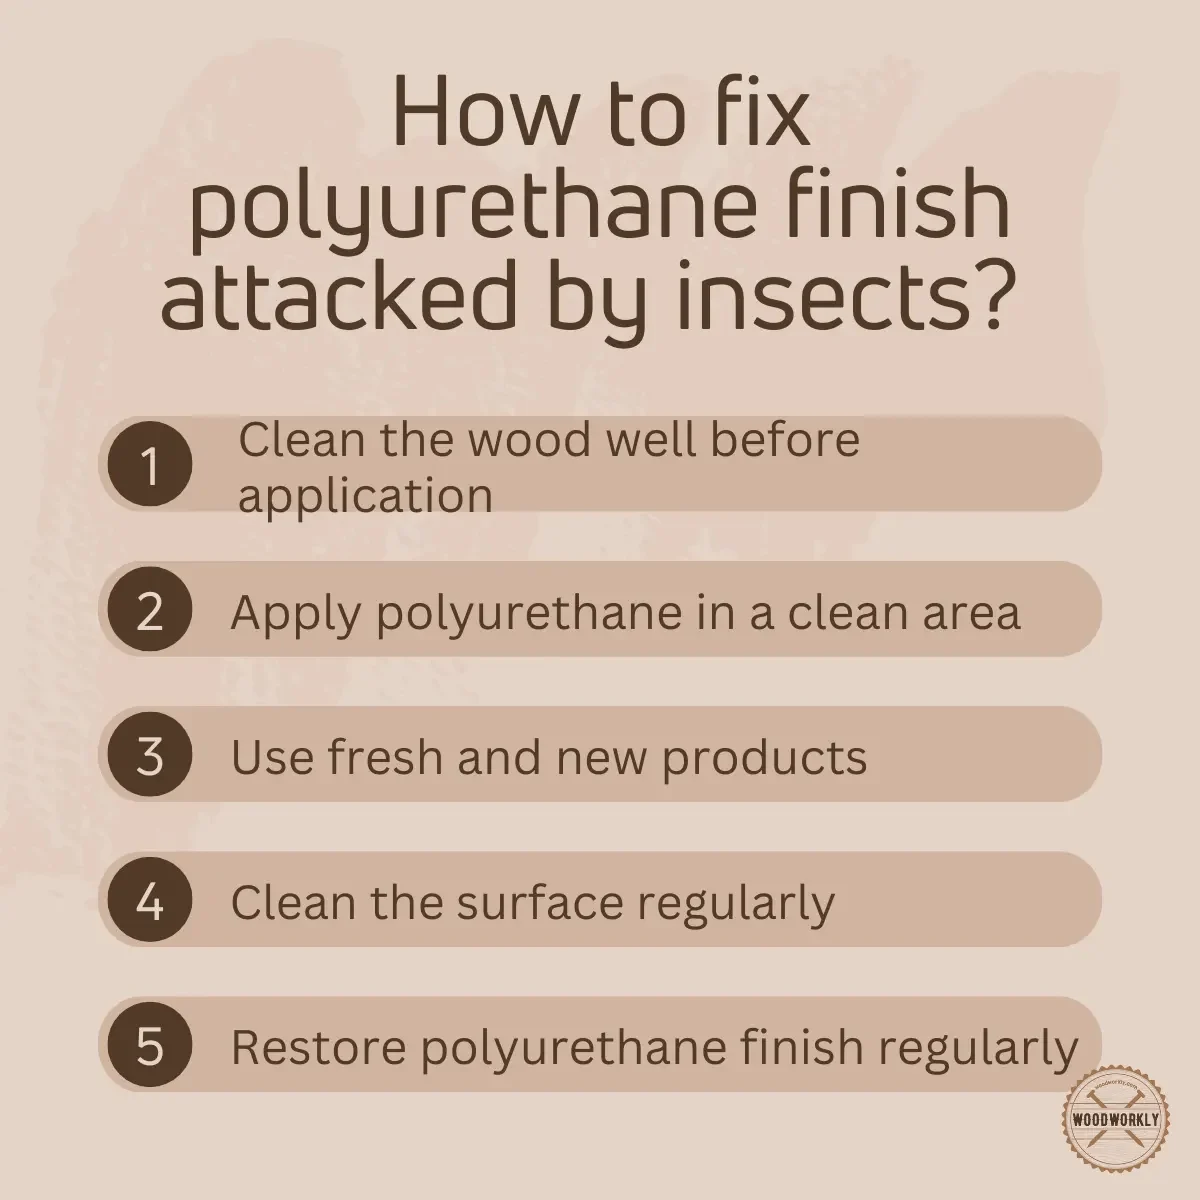 how to fix polyurethane finish attacked by insects